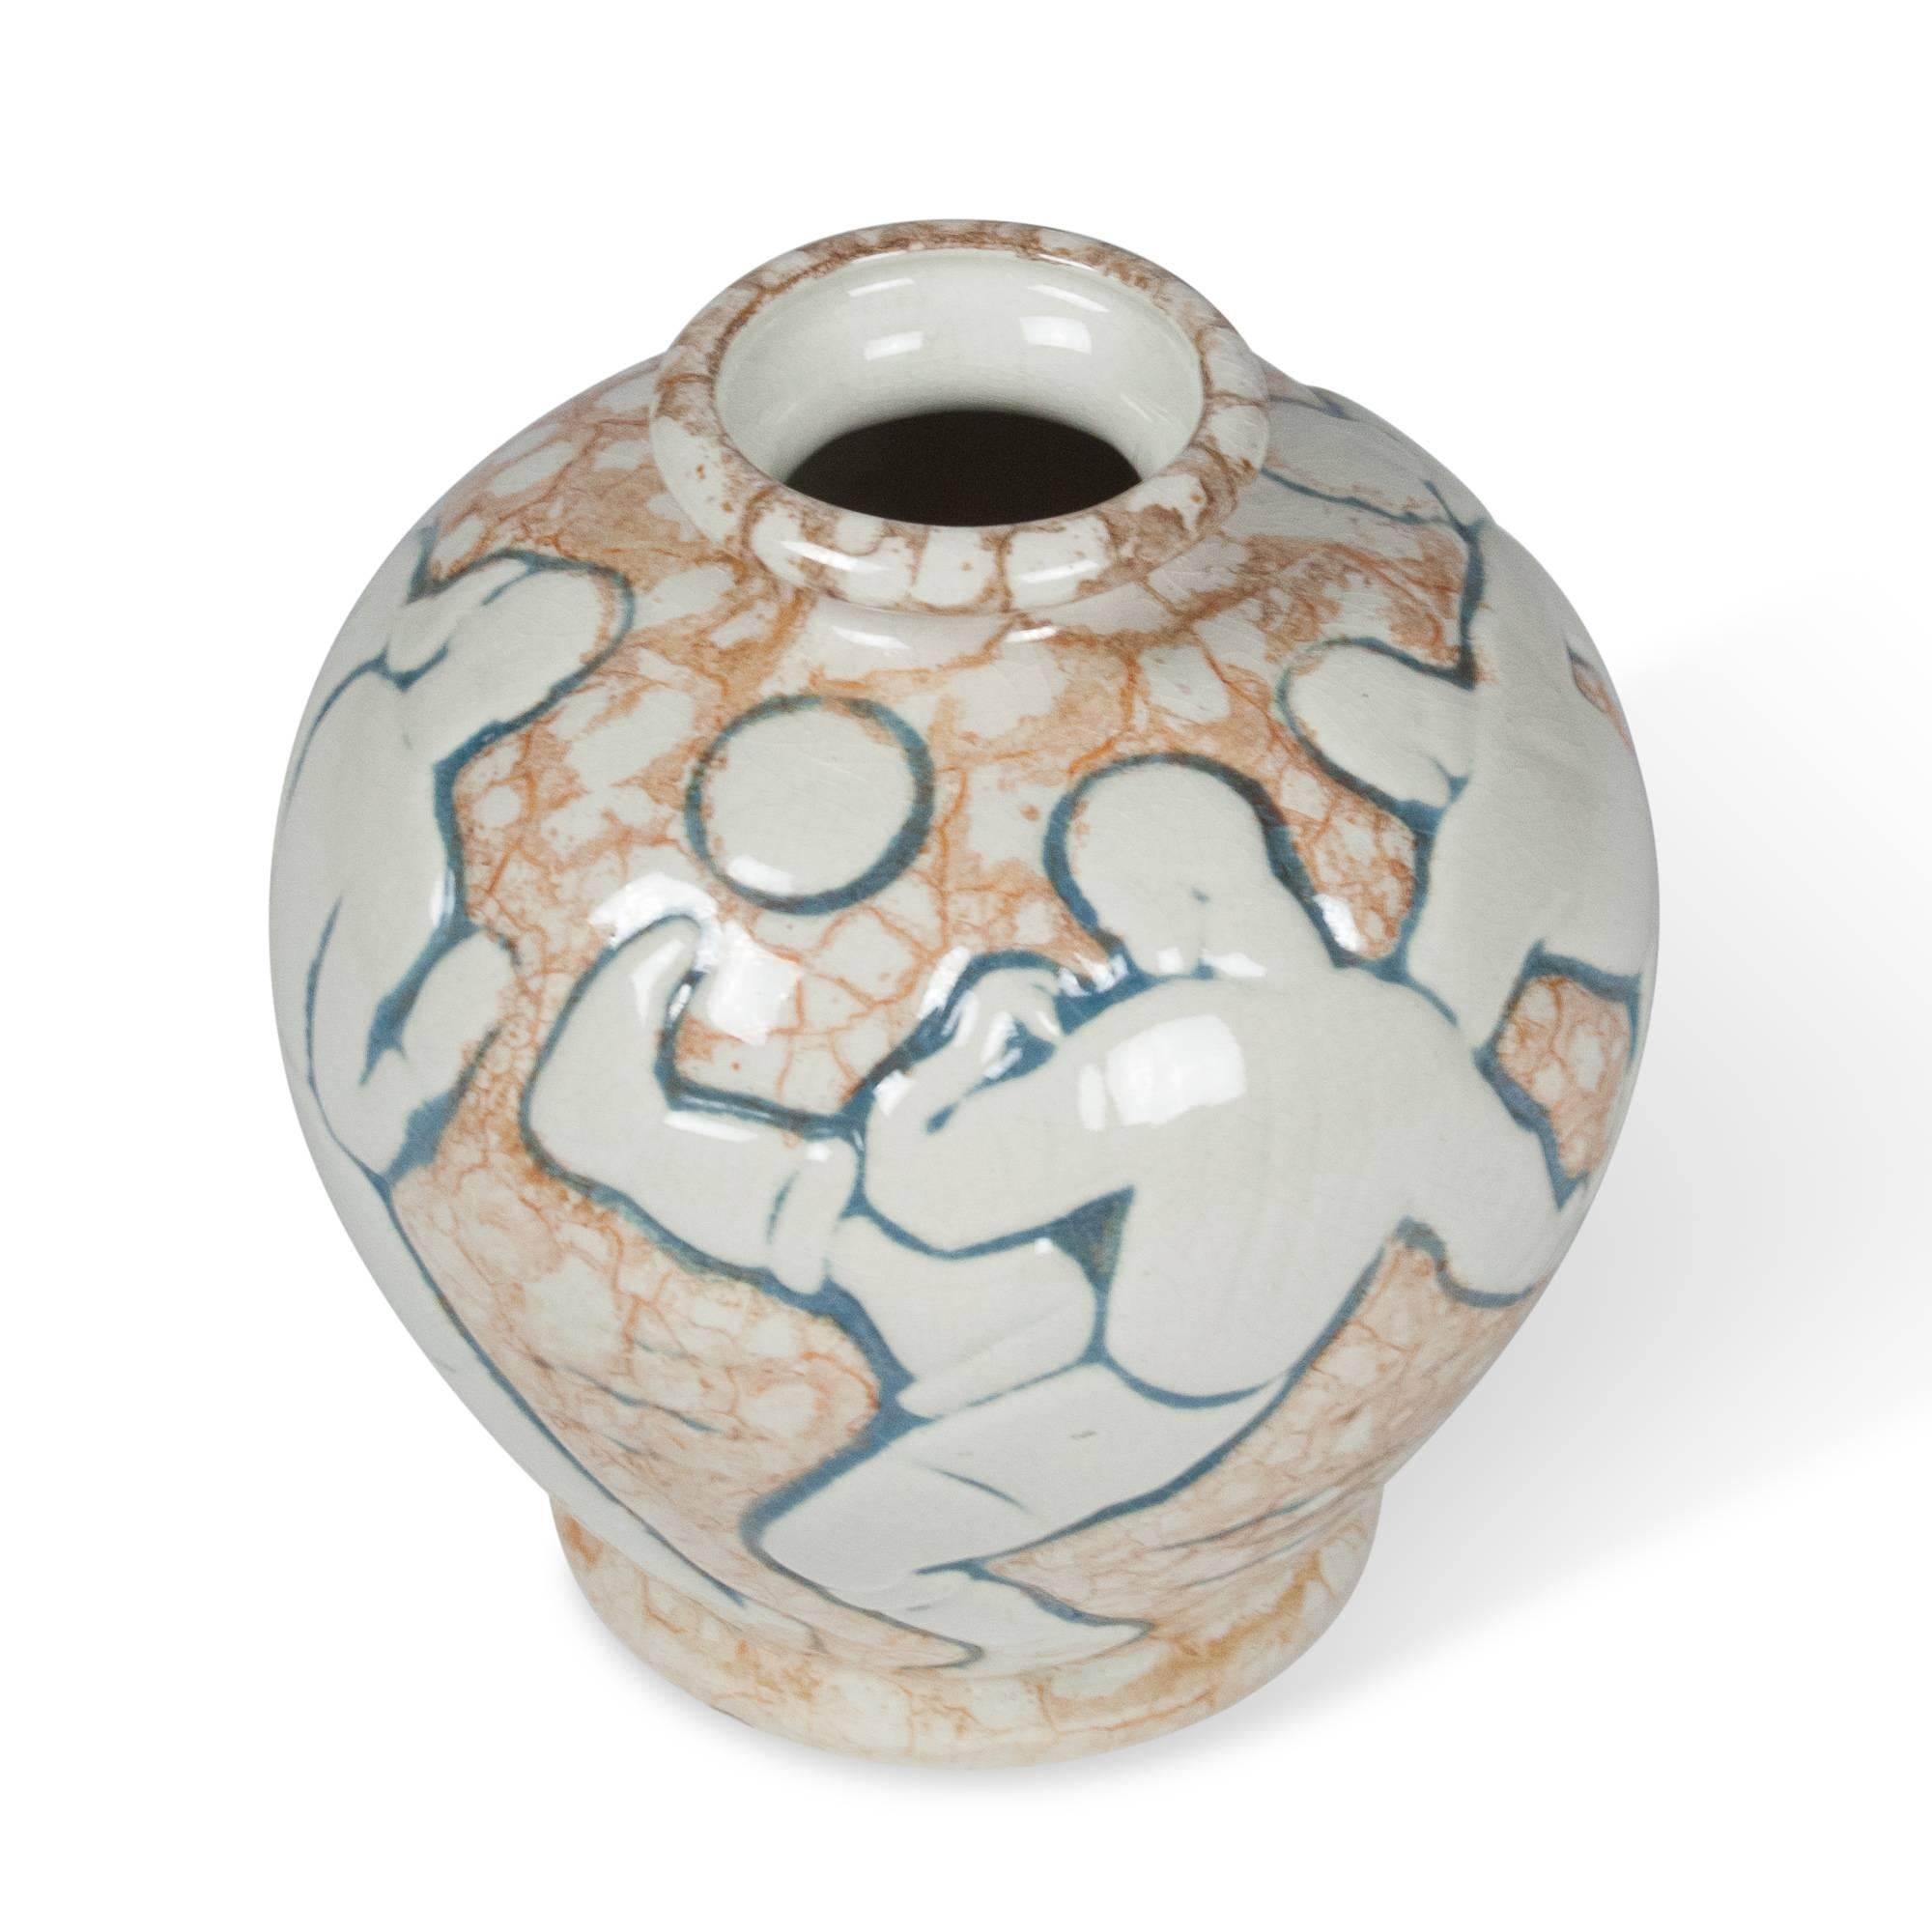 Urn-shaped, neutral-colored ceramic vase depicting figures playing soccer or European football, by Mougin Freres, France, 1930s. Signed. Measures: 7 1/2 in. height, 7 in. diameter.